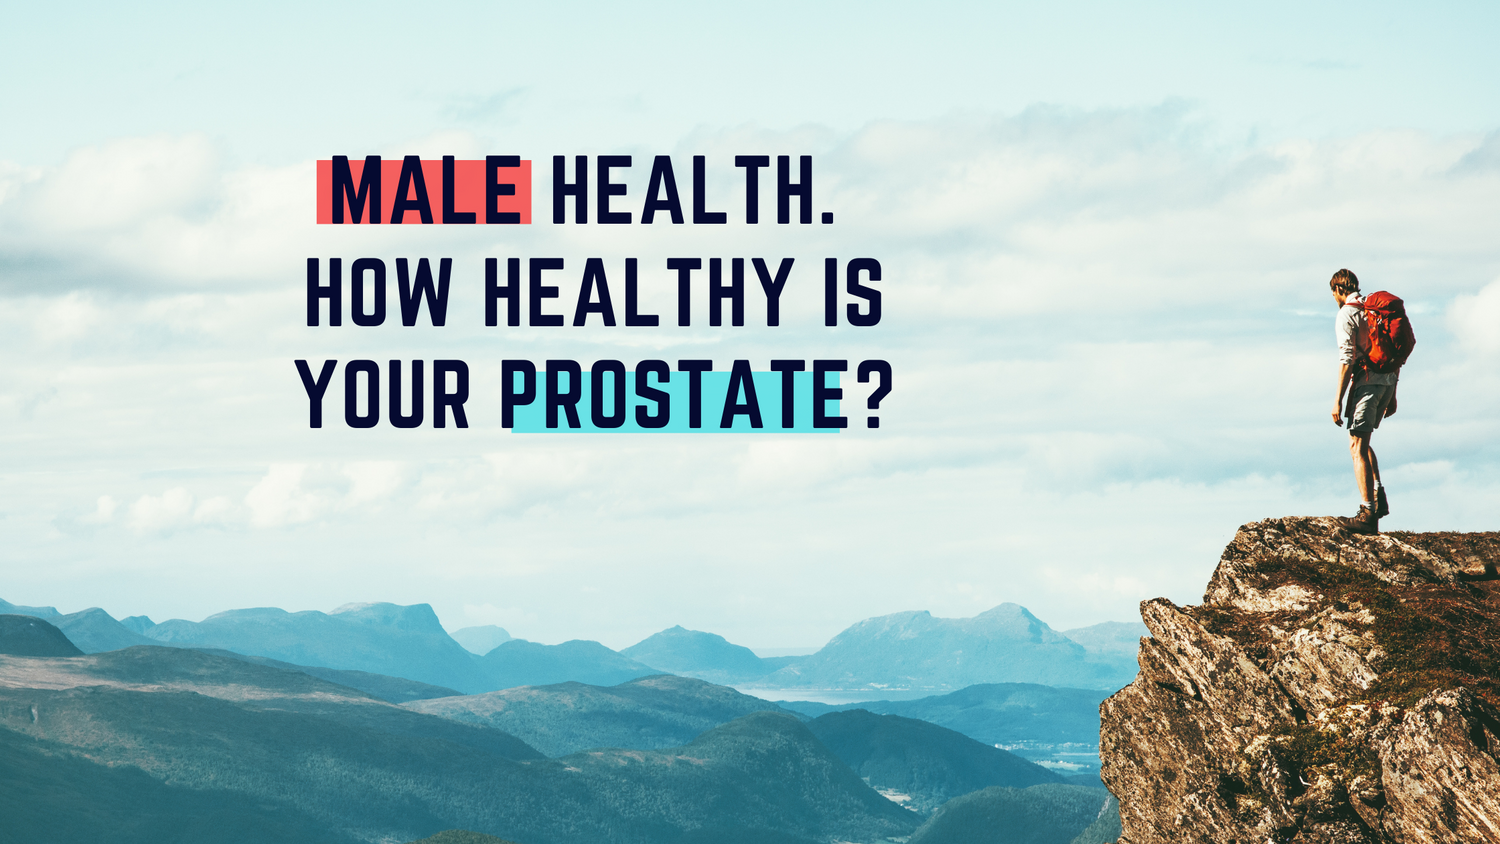 Male Health: The Prostate